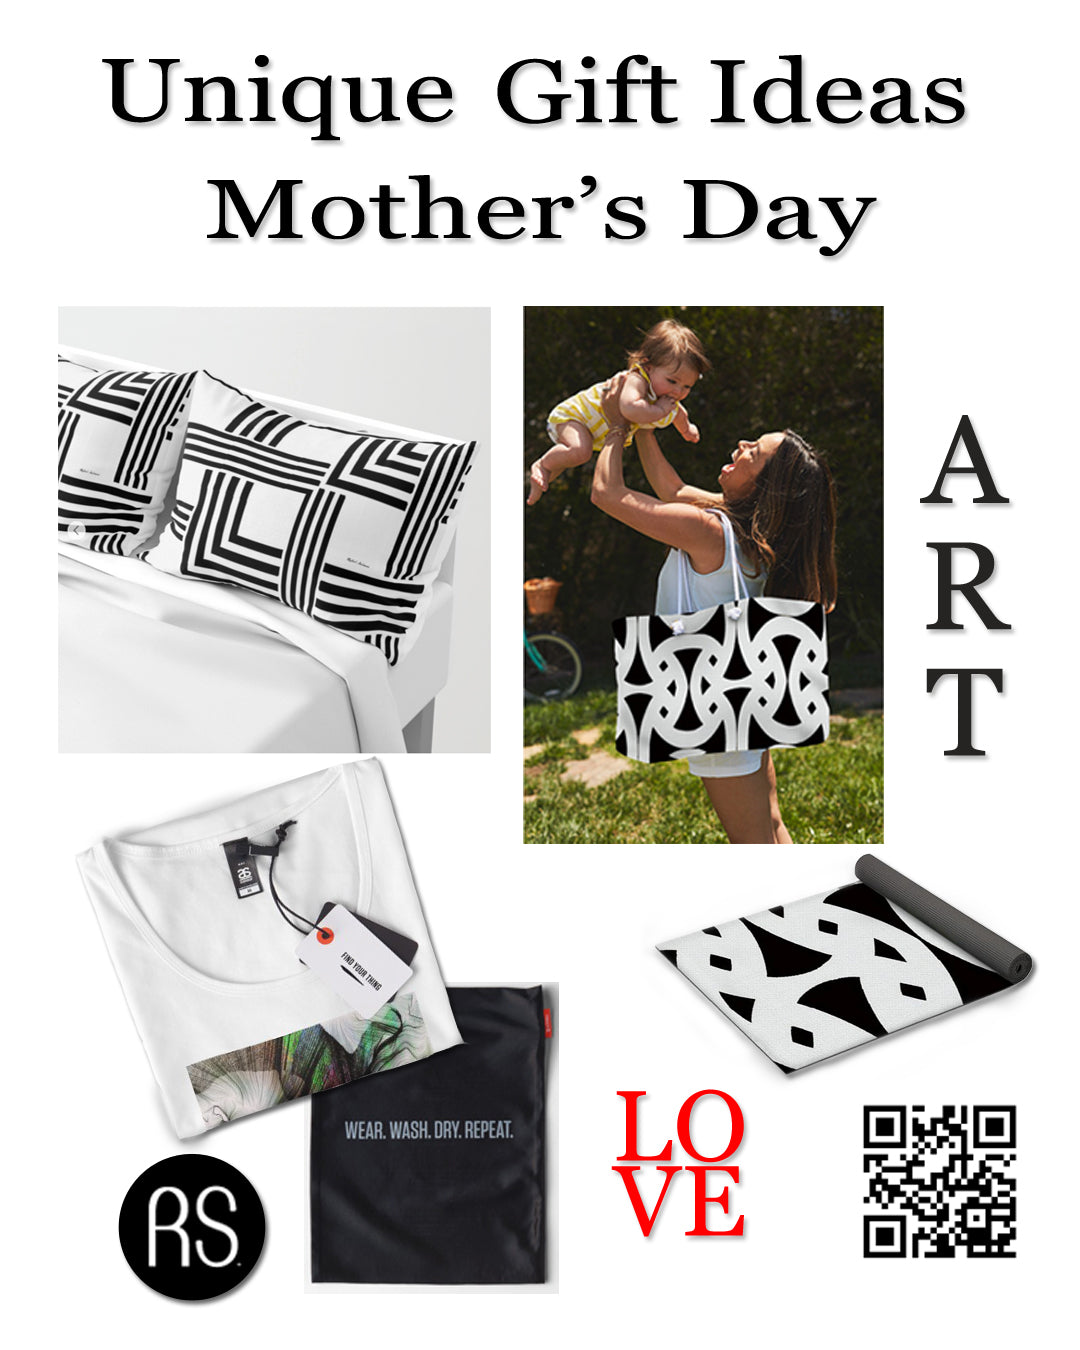 Mother's Day Gift Guide by Rafael Salazar - #Art